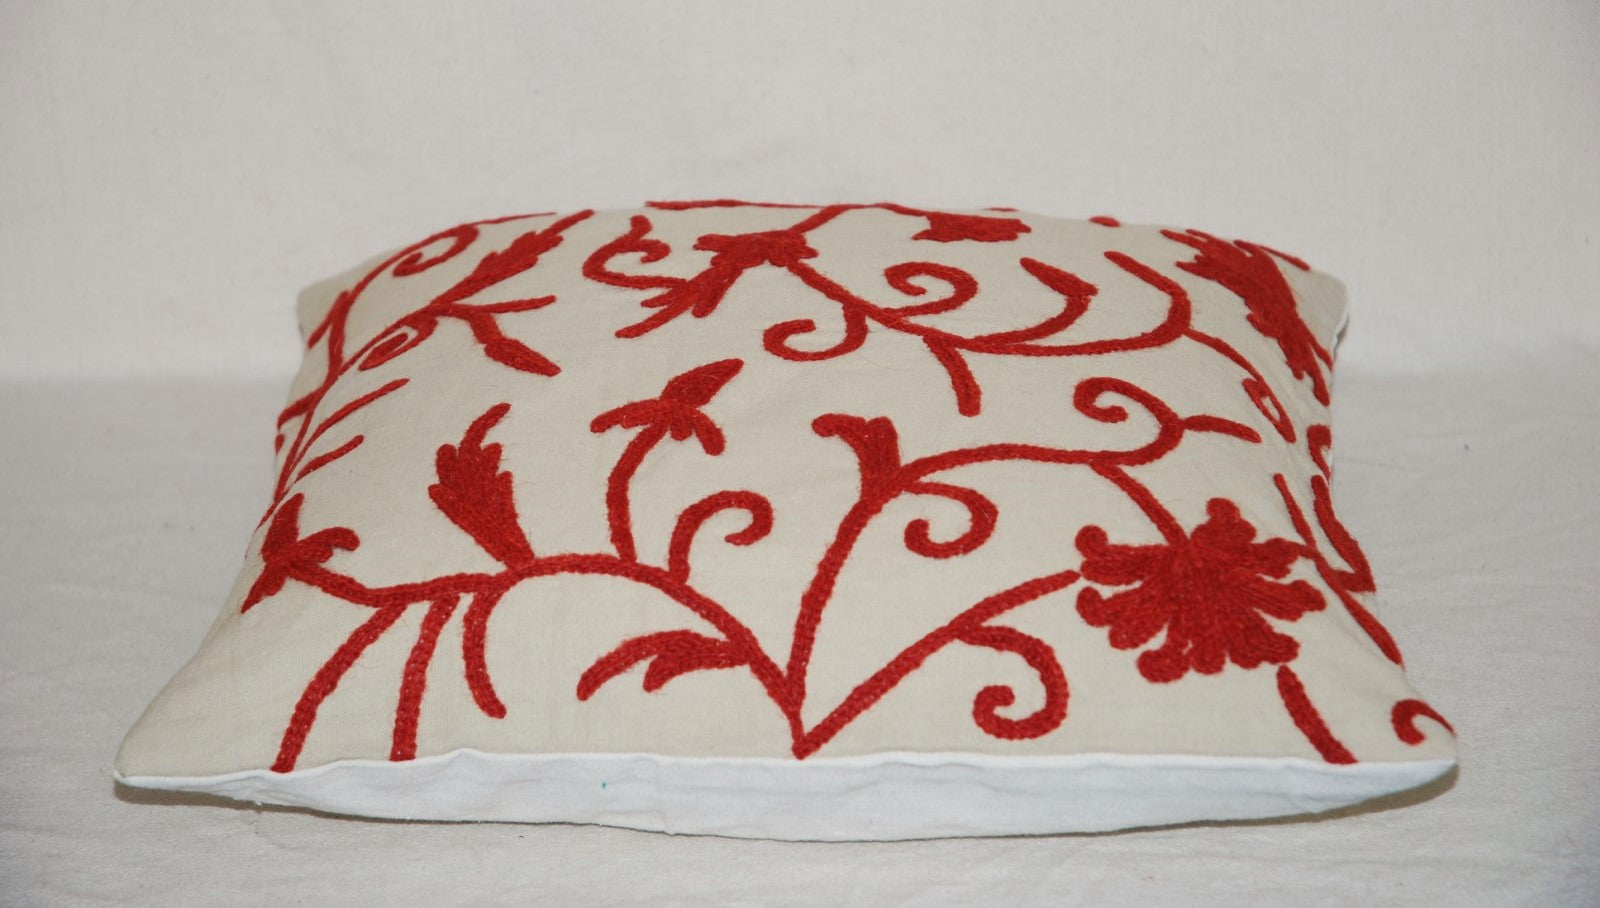 Crewel Wool on Cotton Throw Pillow Sofa, Chair Cushion Cover "Jacobean" Red on Beige #CW342